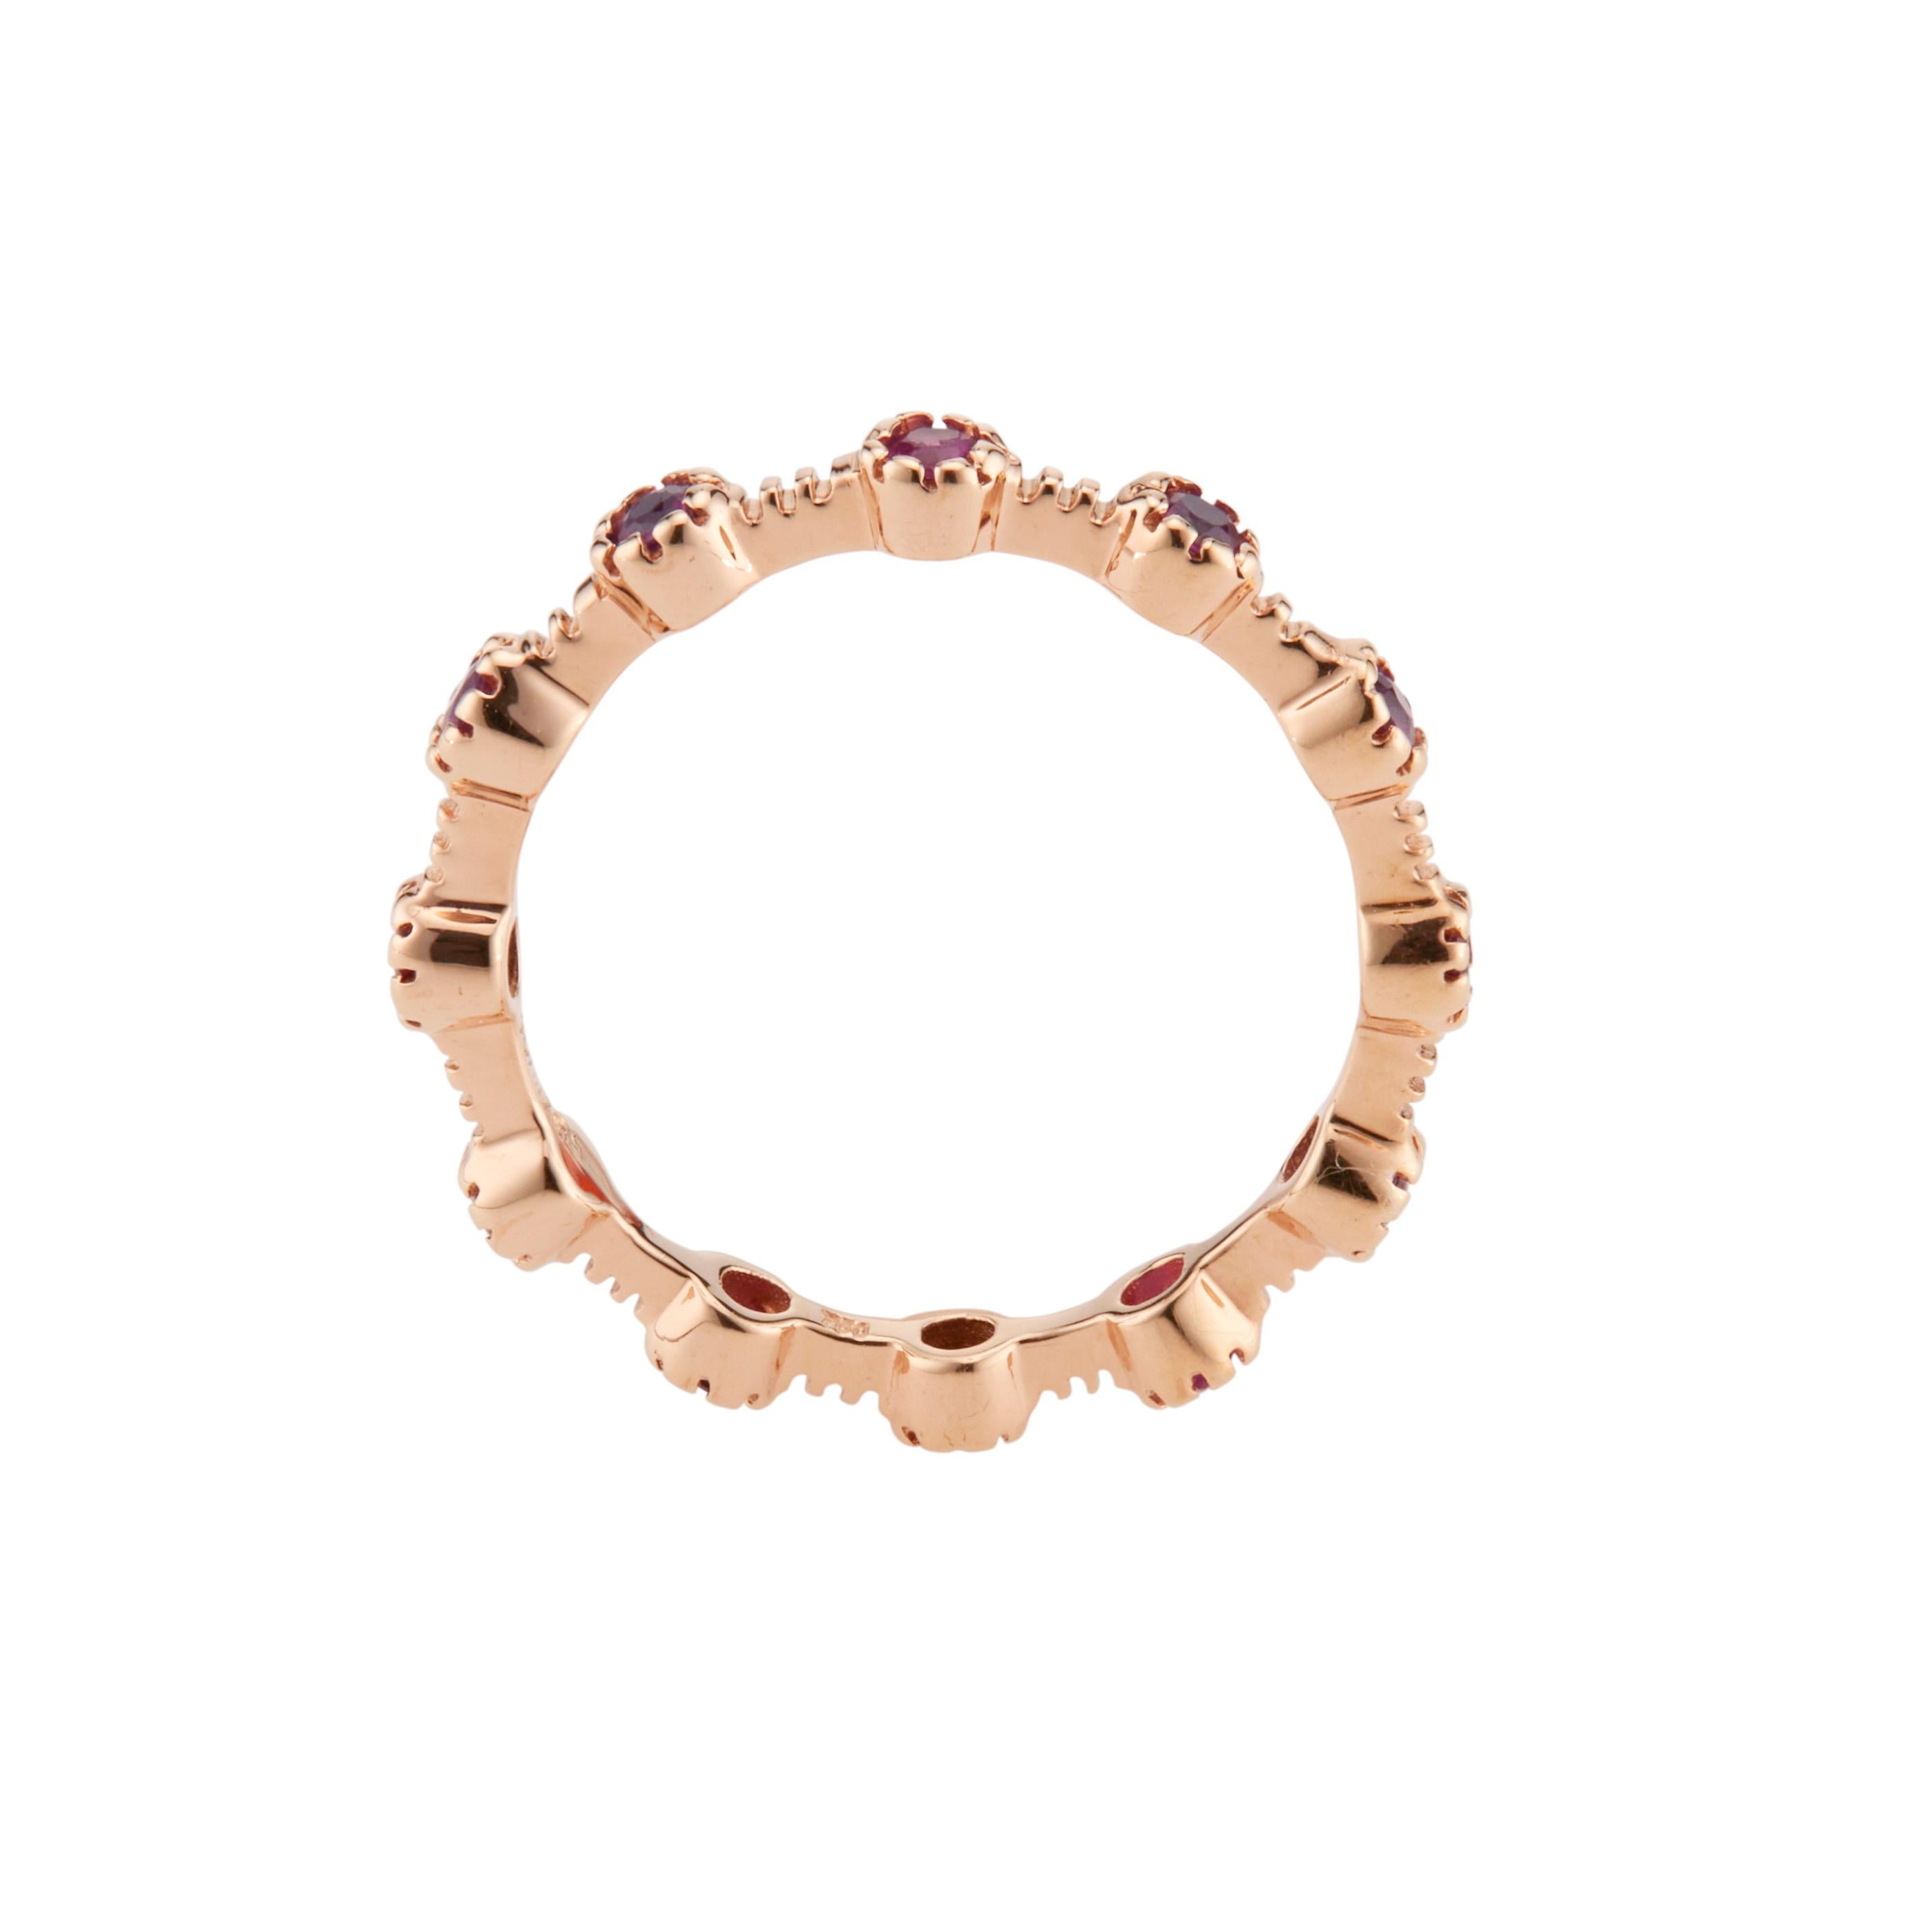 Sonia B.  ruby eternity wedding band. 12 round rubies in a 18k rose gold eternity band. 

12 round rubies approx. total weight 1.10cts.
Size 8 
Weight: 2.4 grams
18k rose gold
Stamped Sonia B. stamp is worn. 